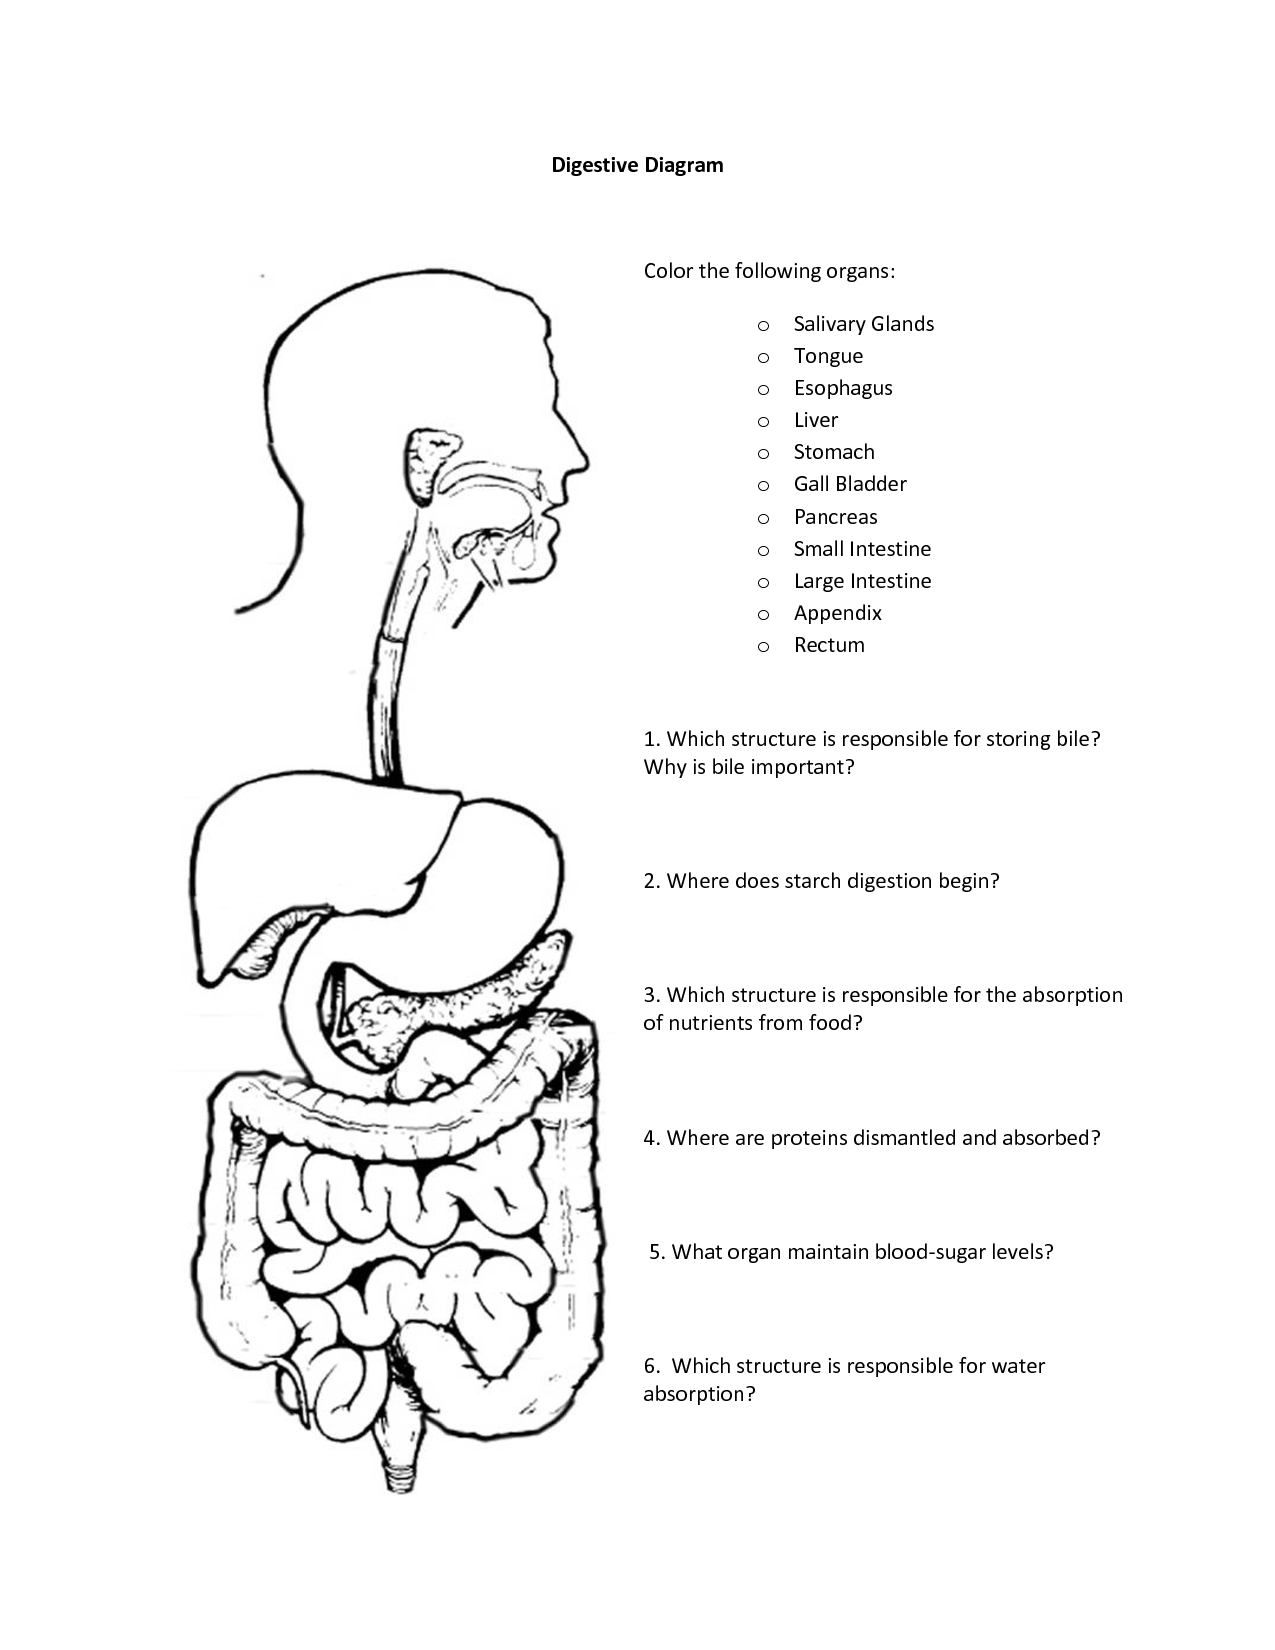 Free Coloring Pages Of Digestive System, Download Free Coloring For Digestive System Worksheet High School